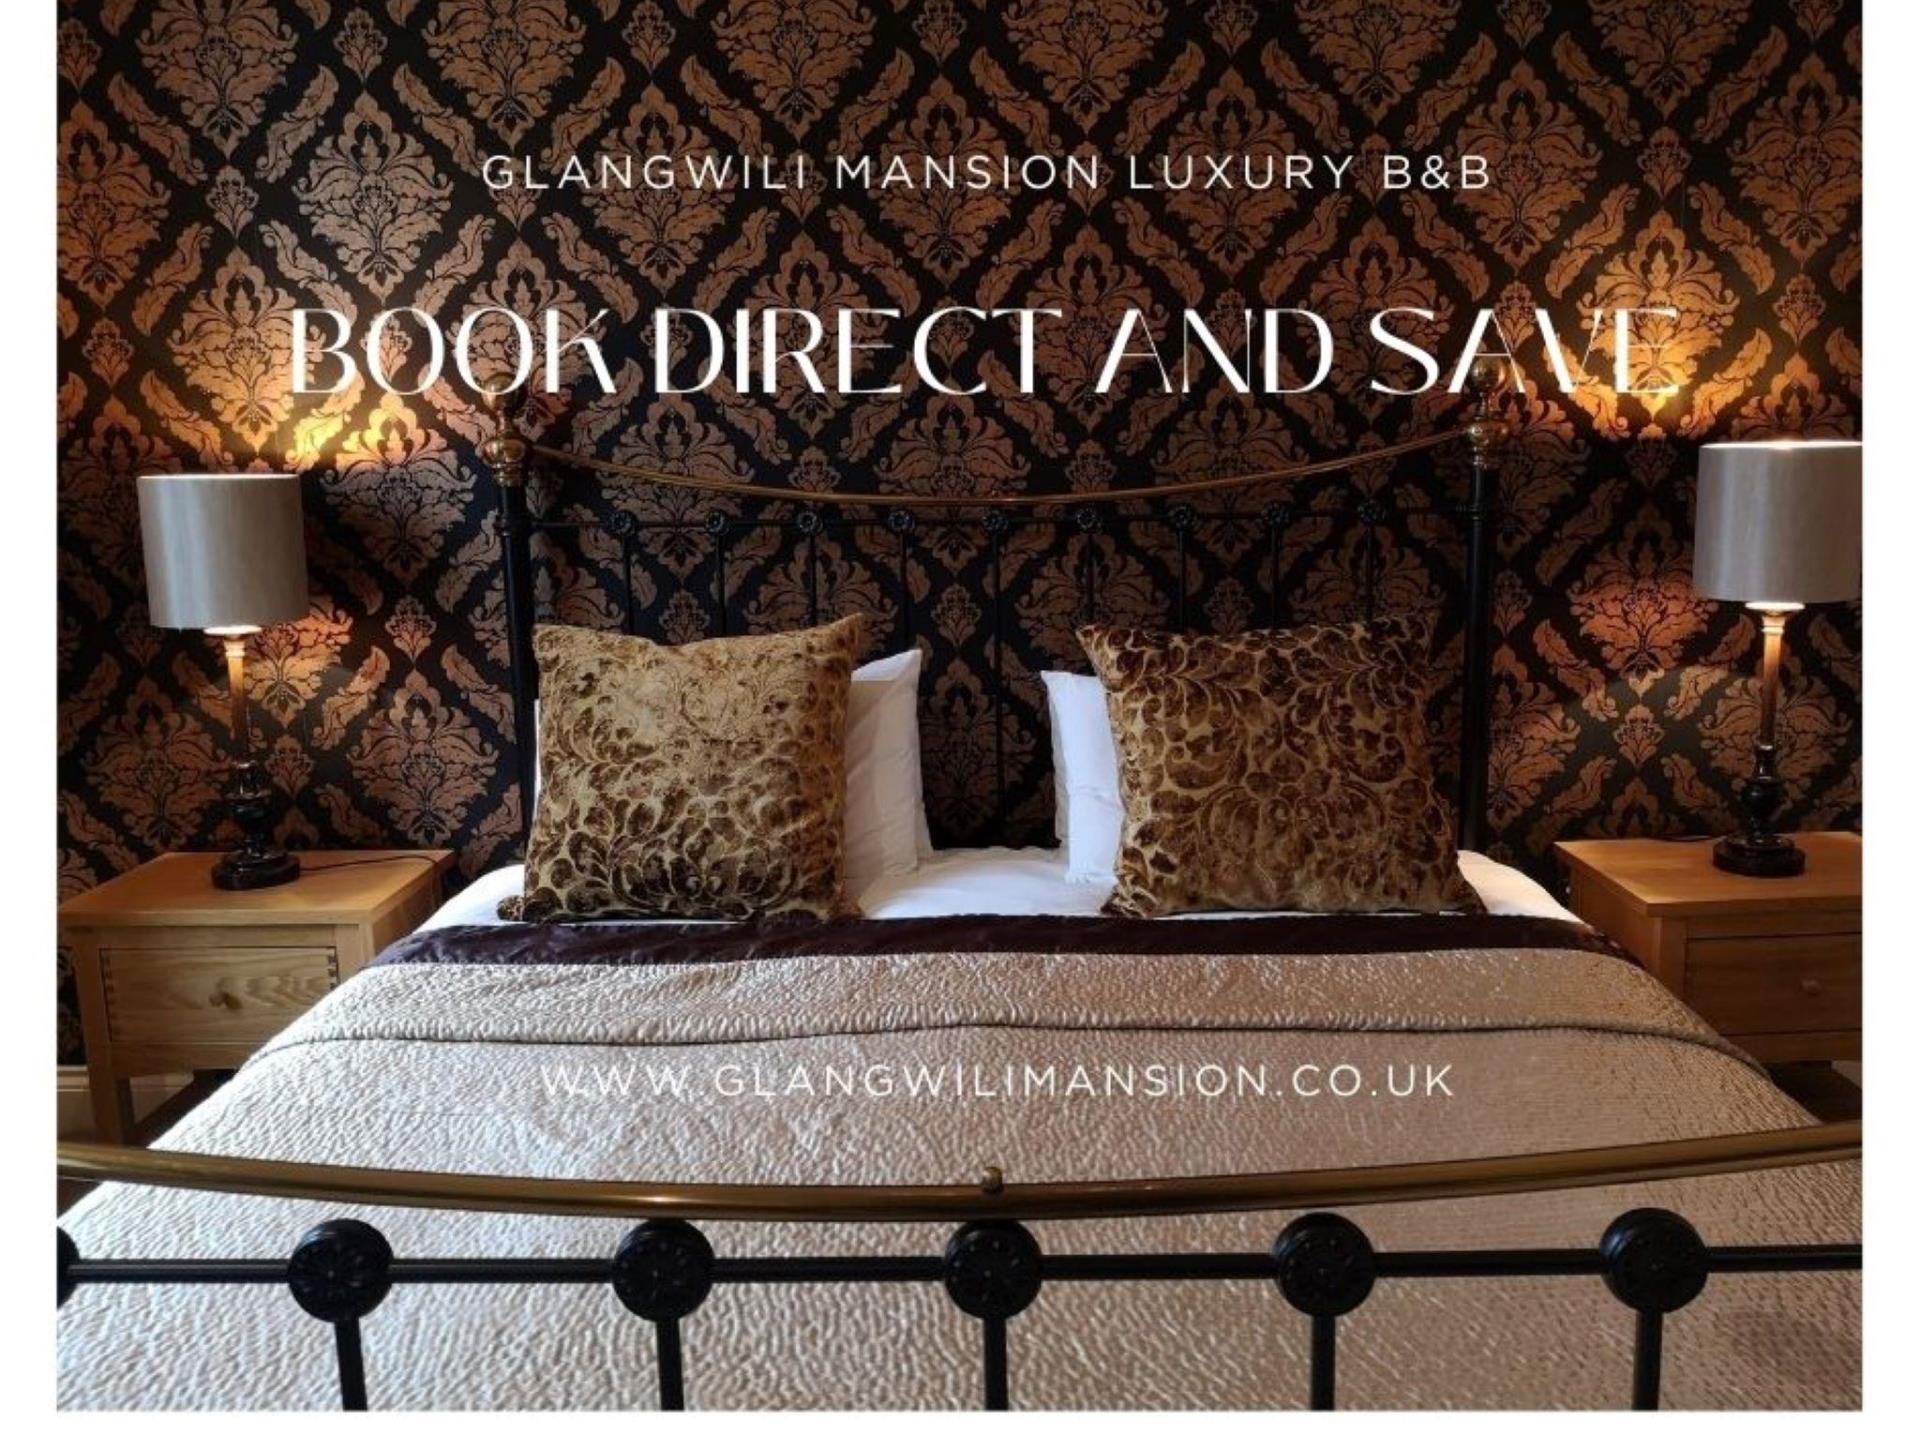 Glangwili Mansion Luxury B&B -Book Direct and Save